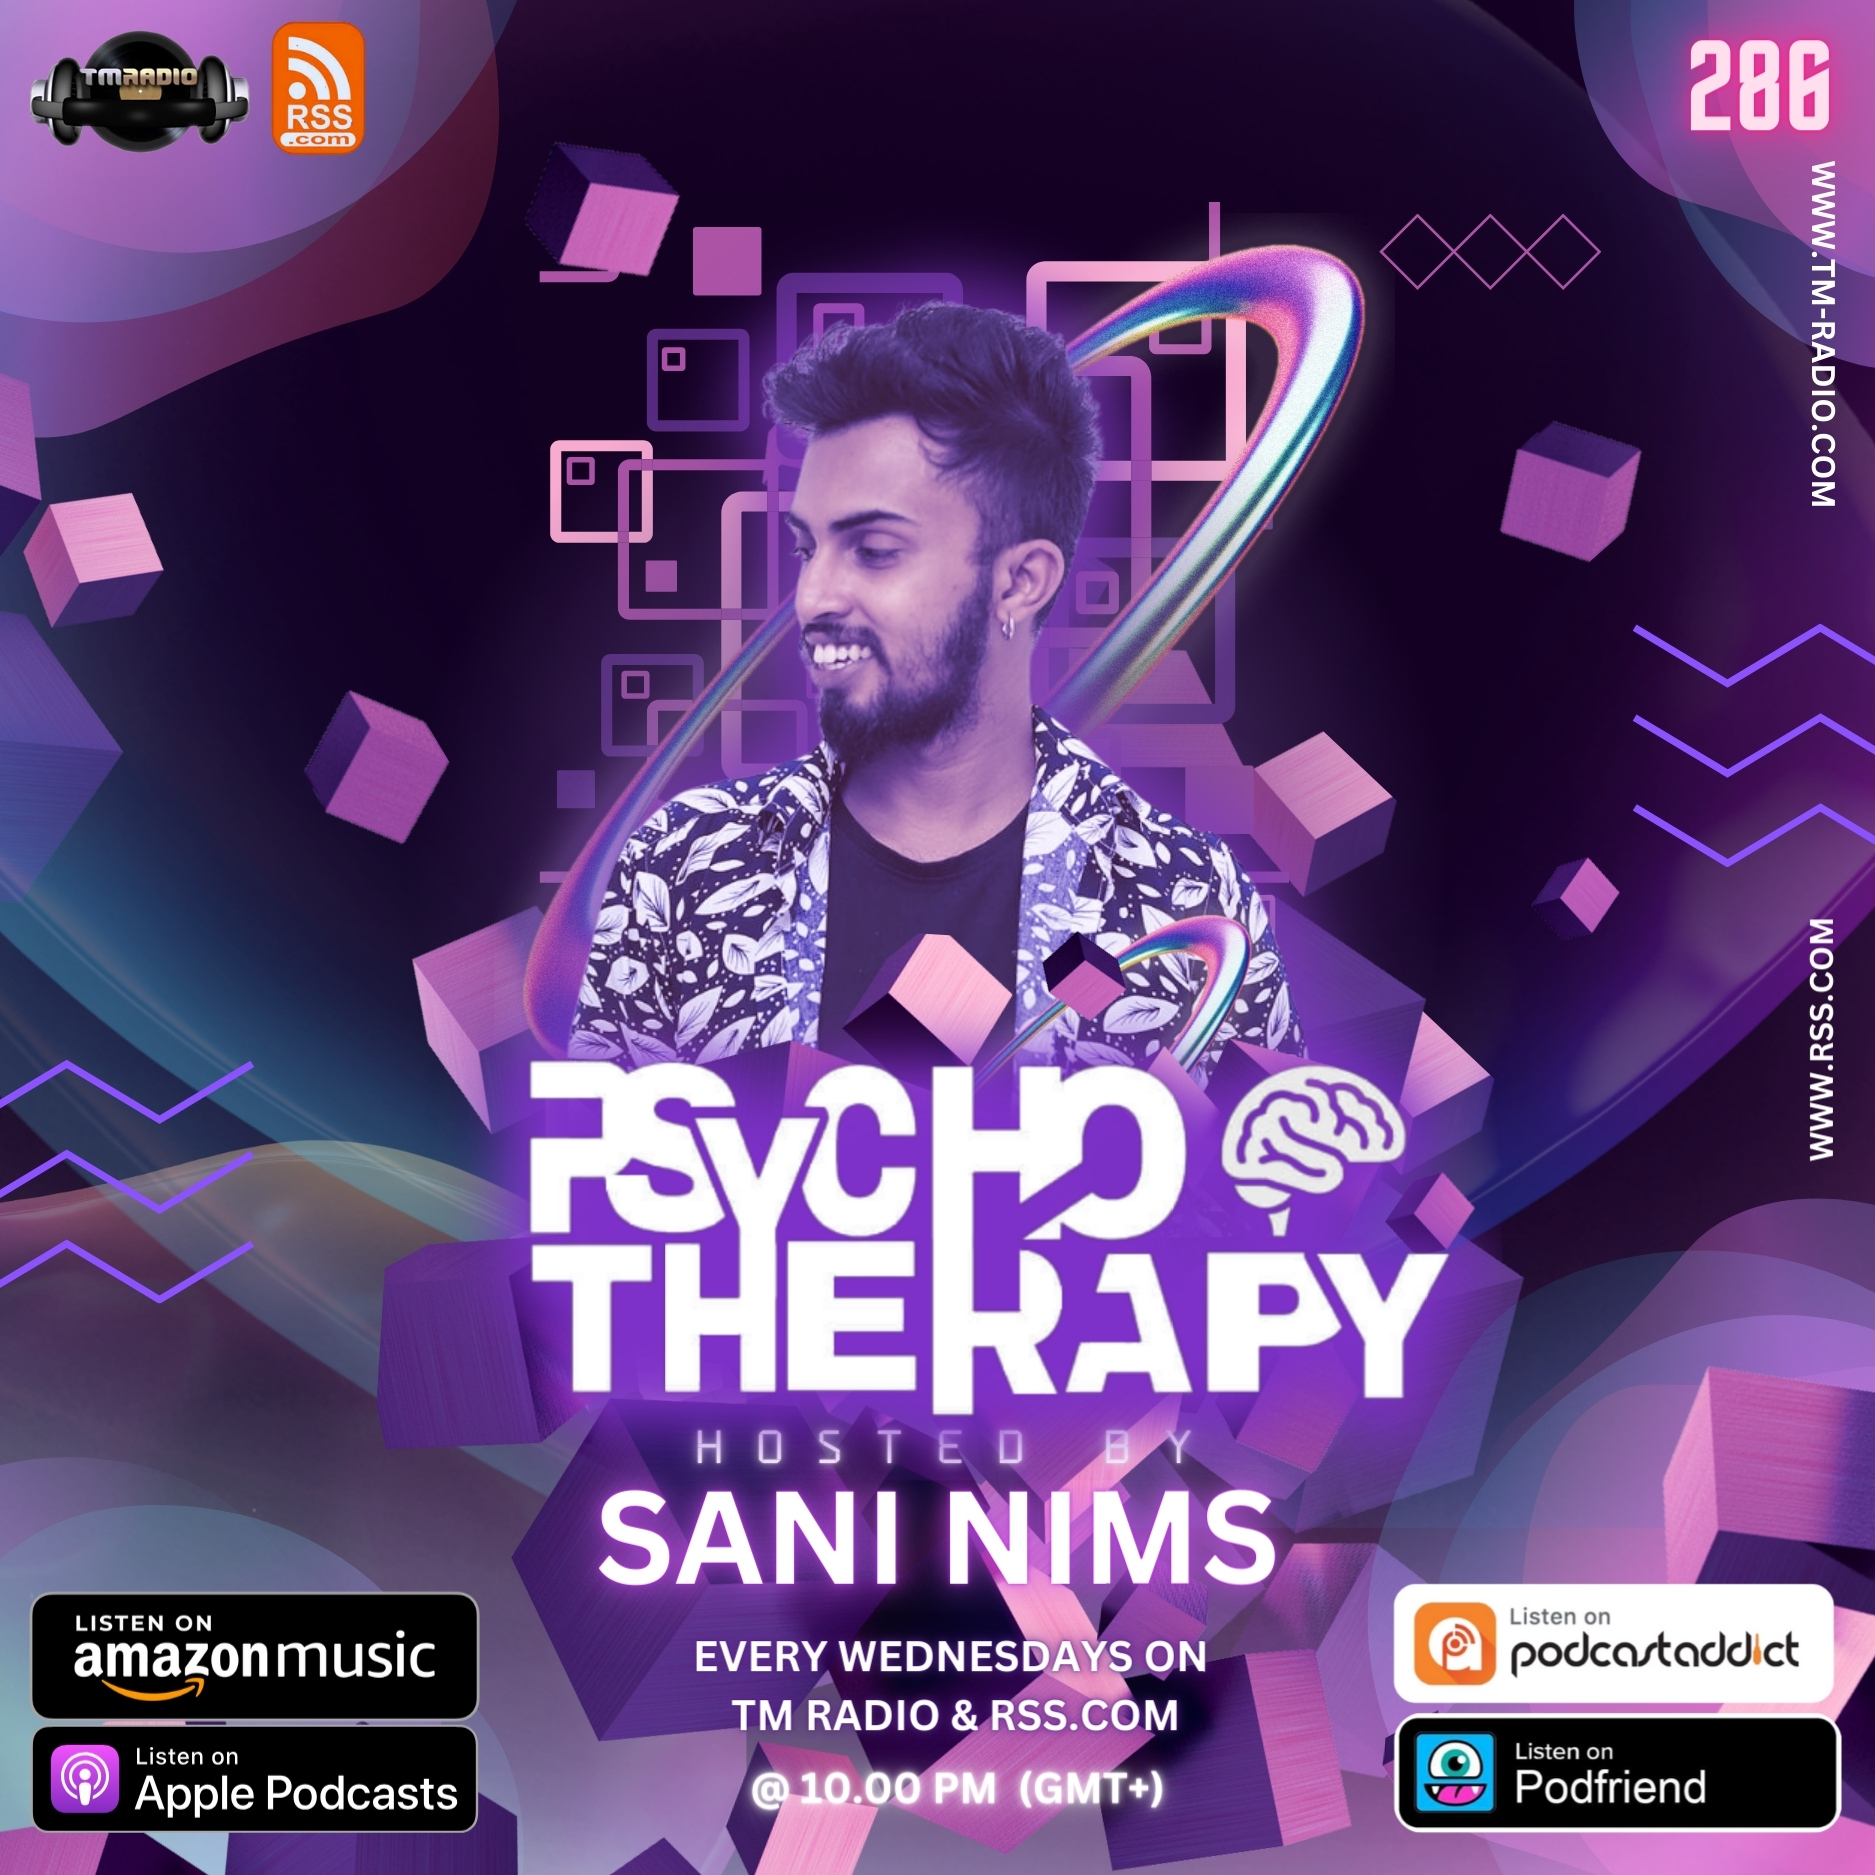 PSYCHO THERAPY EP 286 BY SANI NIMS ON TM RADIO (from April 10th)